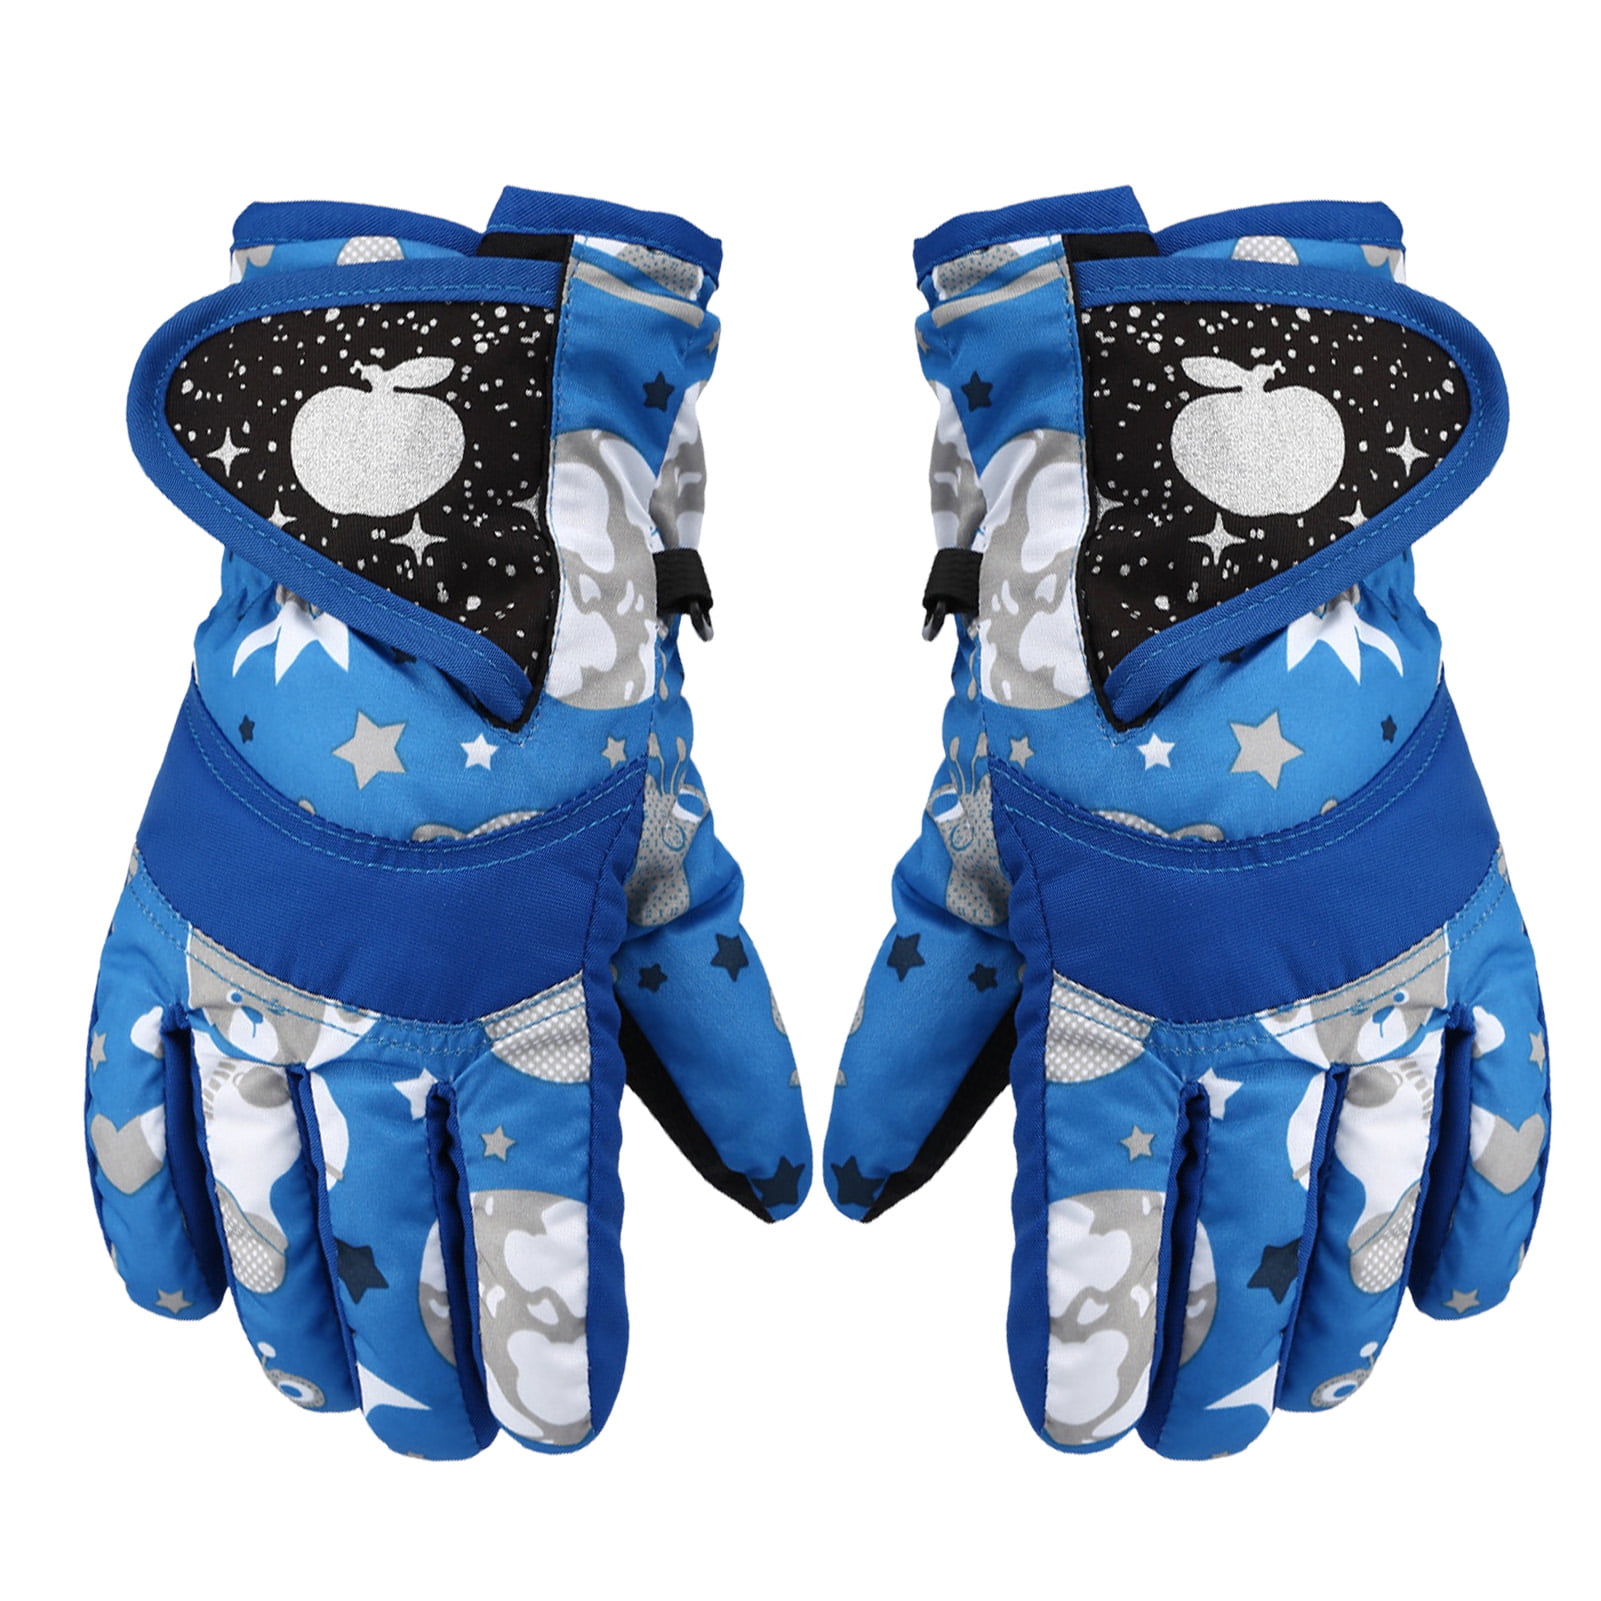 Boys Ski Gloves -30°F Waterproof Touch Screen Snowboard Gloves for Men Women Warm Winter Gloves for Cold Weather Girls Youth 